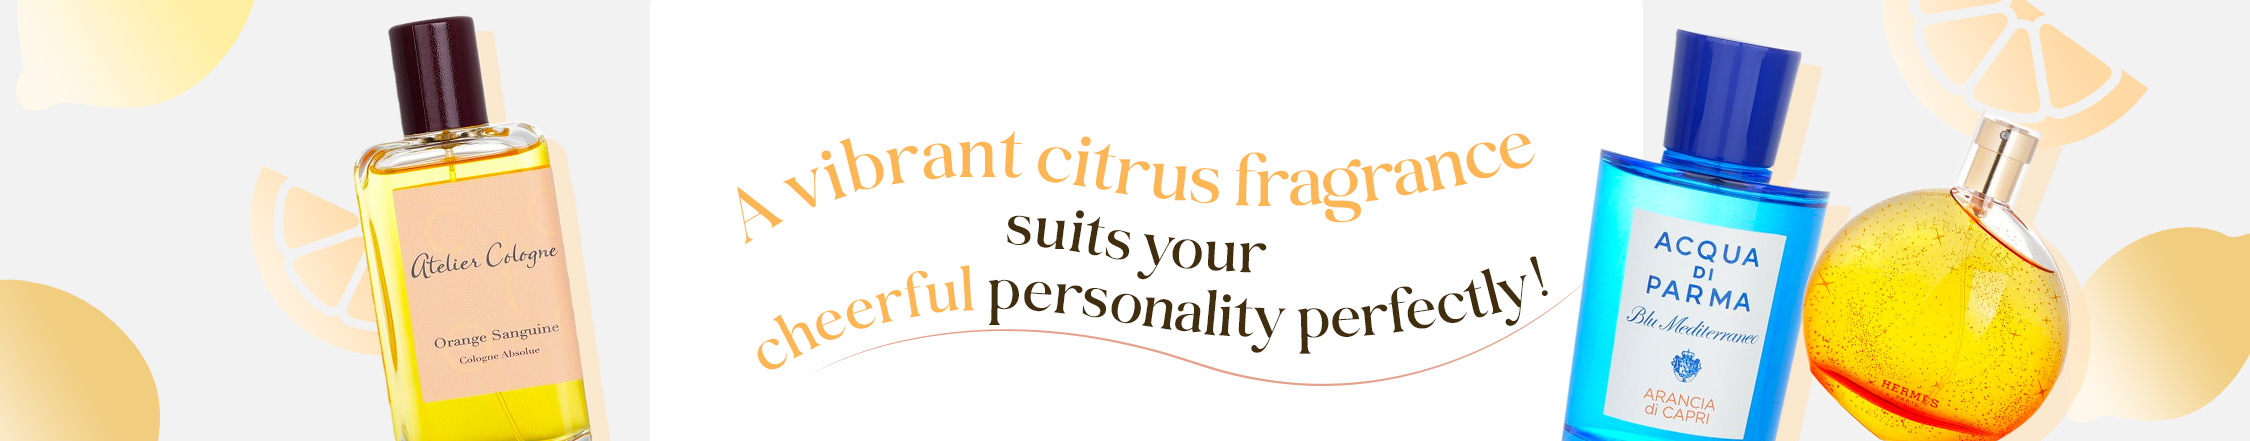 Pop Quiz result, A vibrant citrus fragrance suits your cheerful personality, ACQUA DI PARMA perfume, TELIER COLOGNE perfume, HERMES perfume, Article Dividers